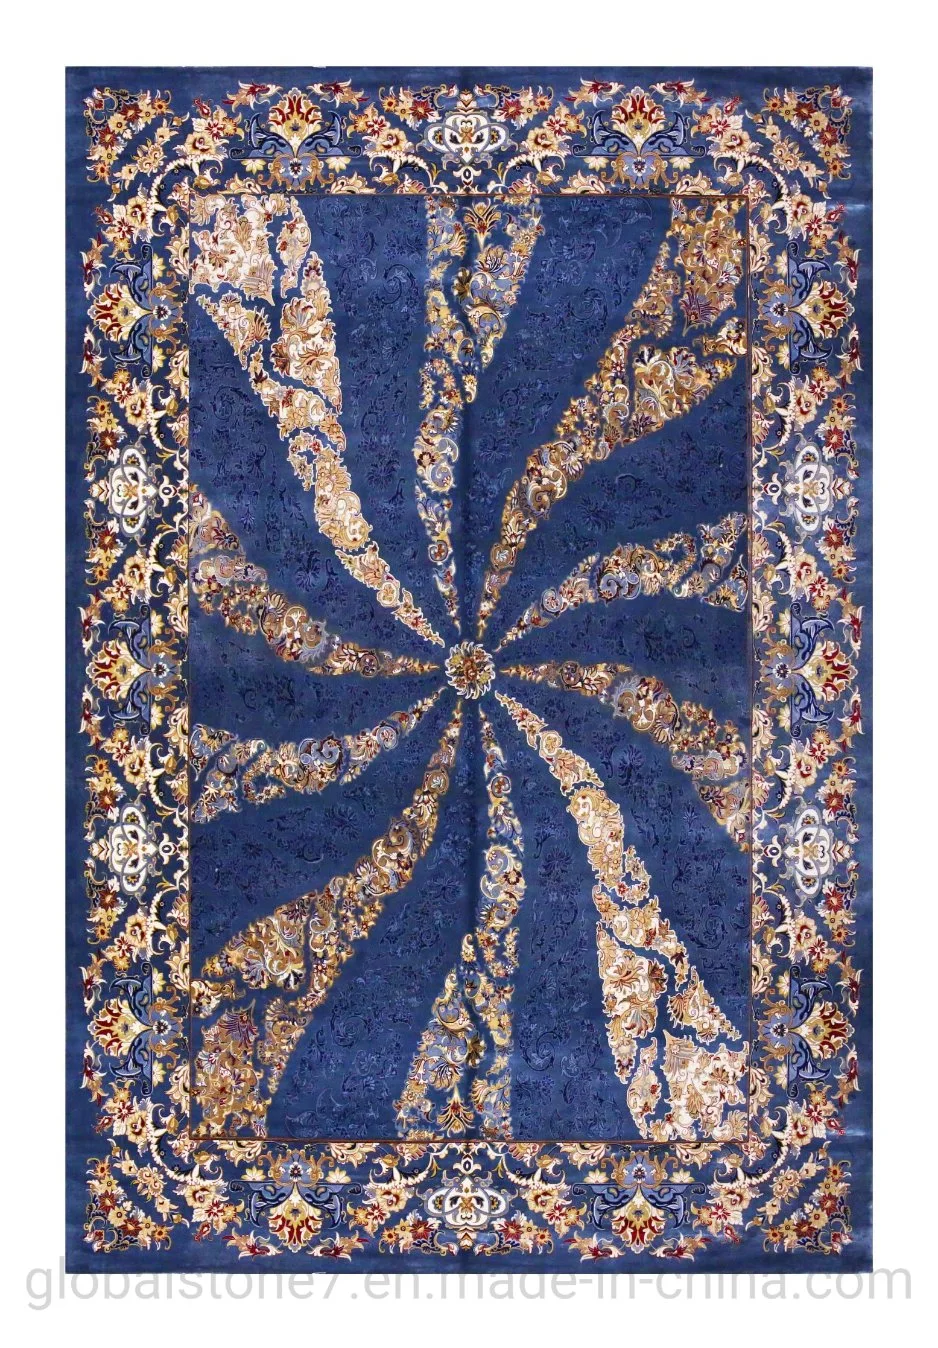 Hand Knotted Silk Carpets Floor Bamboo Rugs for Home Decor (AR-B-M-2009161)